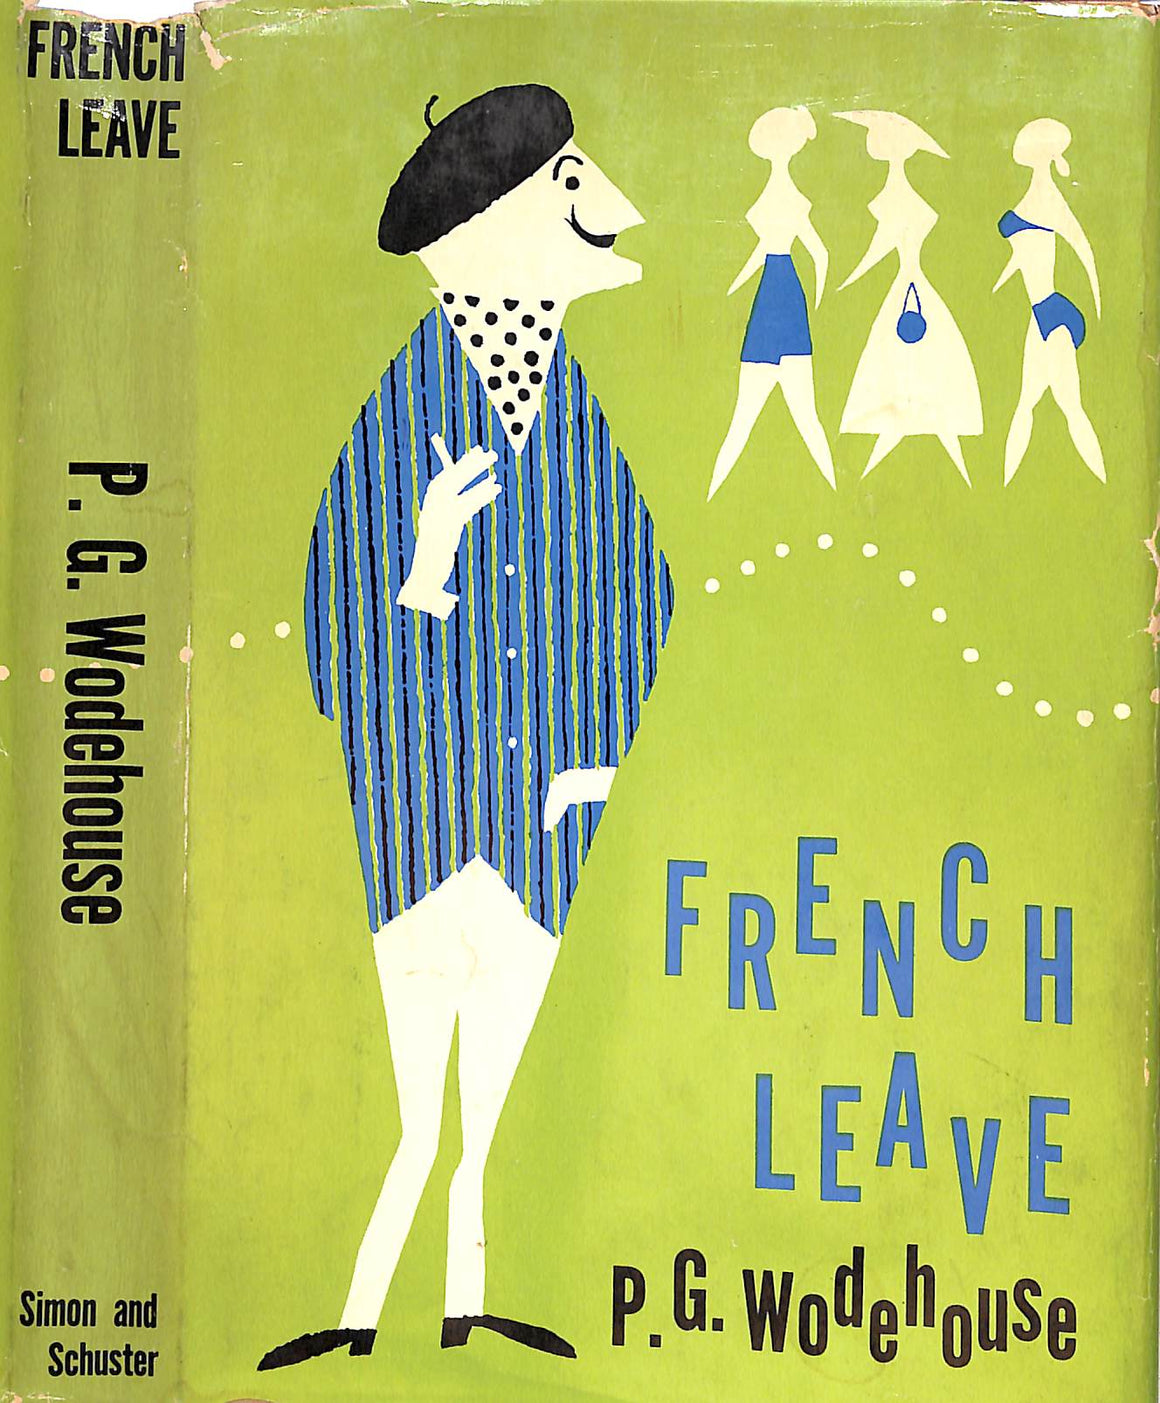 "French Leave" 1959 WODEHOUSE, P.G.